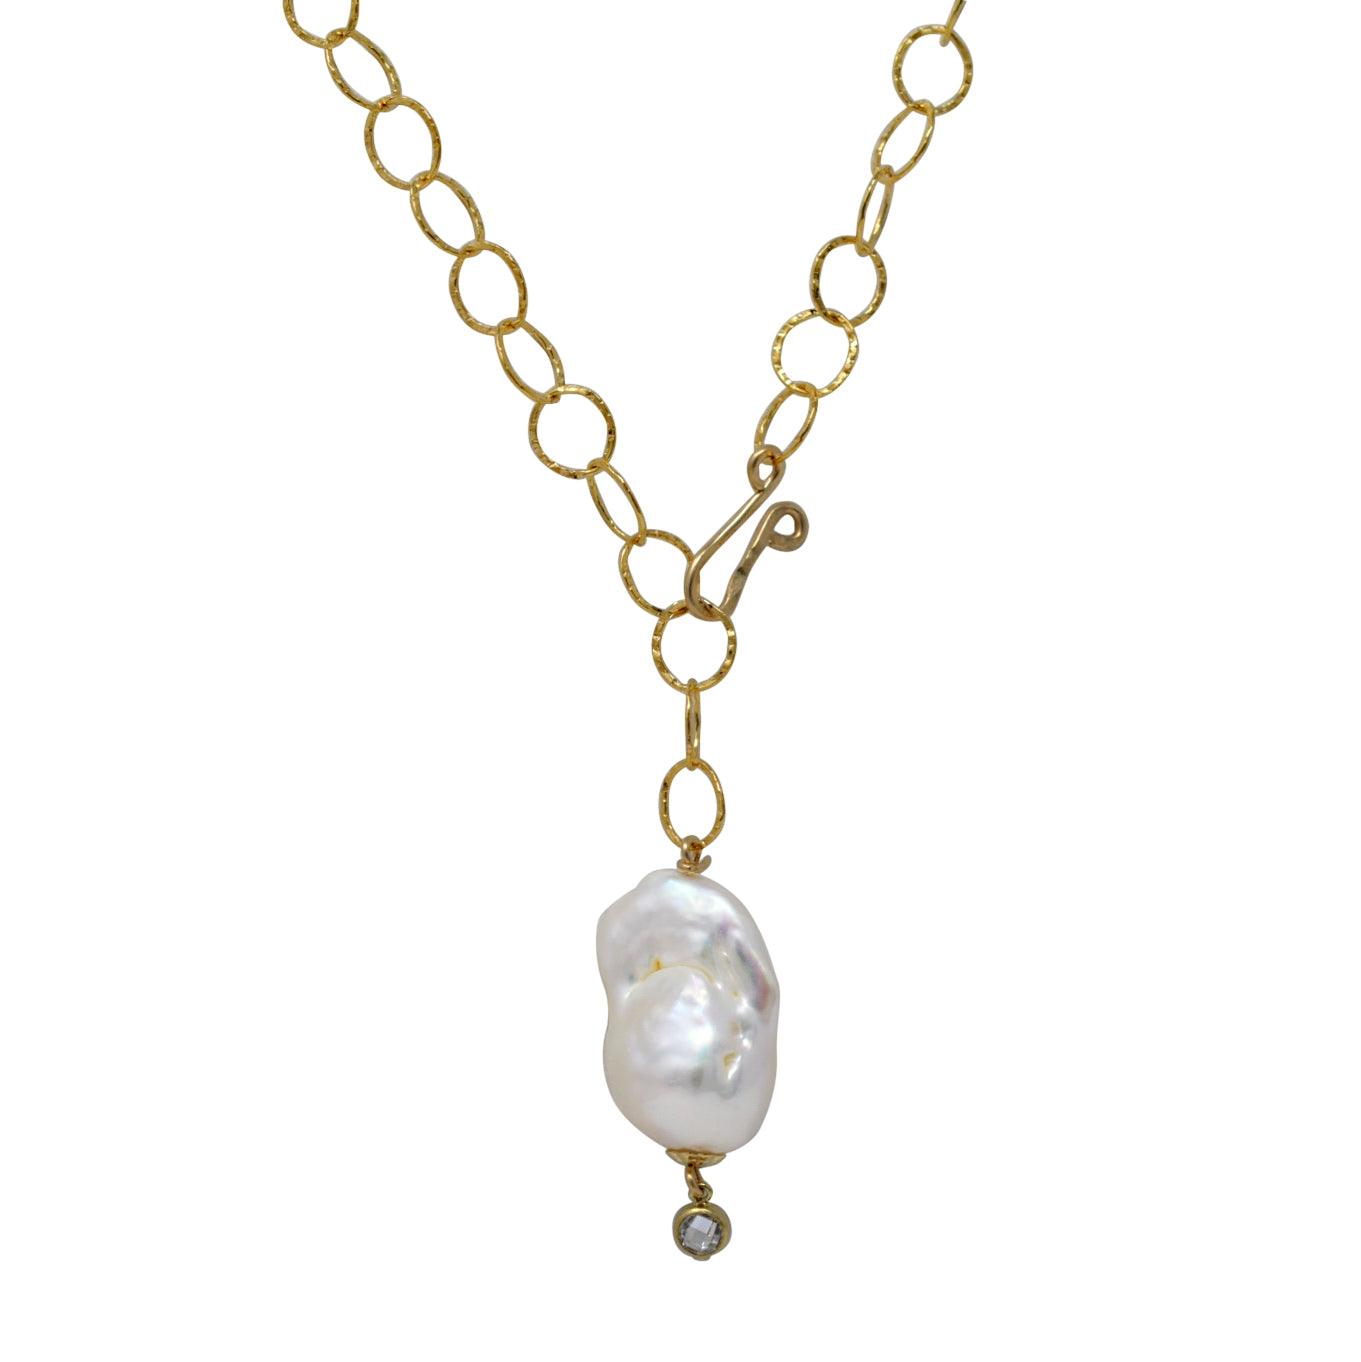 ONE - gold filled lariat necklace with Massive Baroque Pearl - MILK VELVET PEARLS